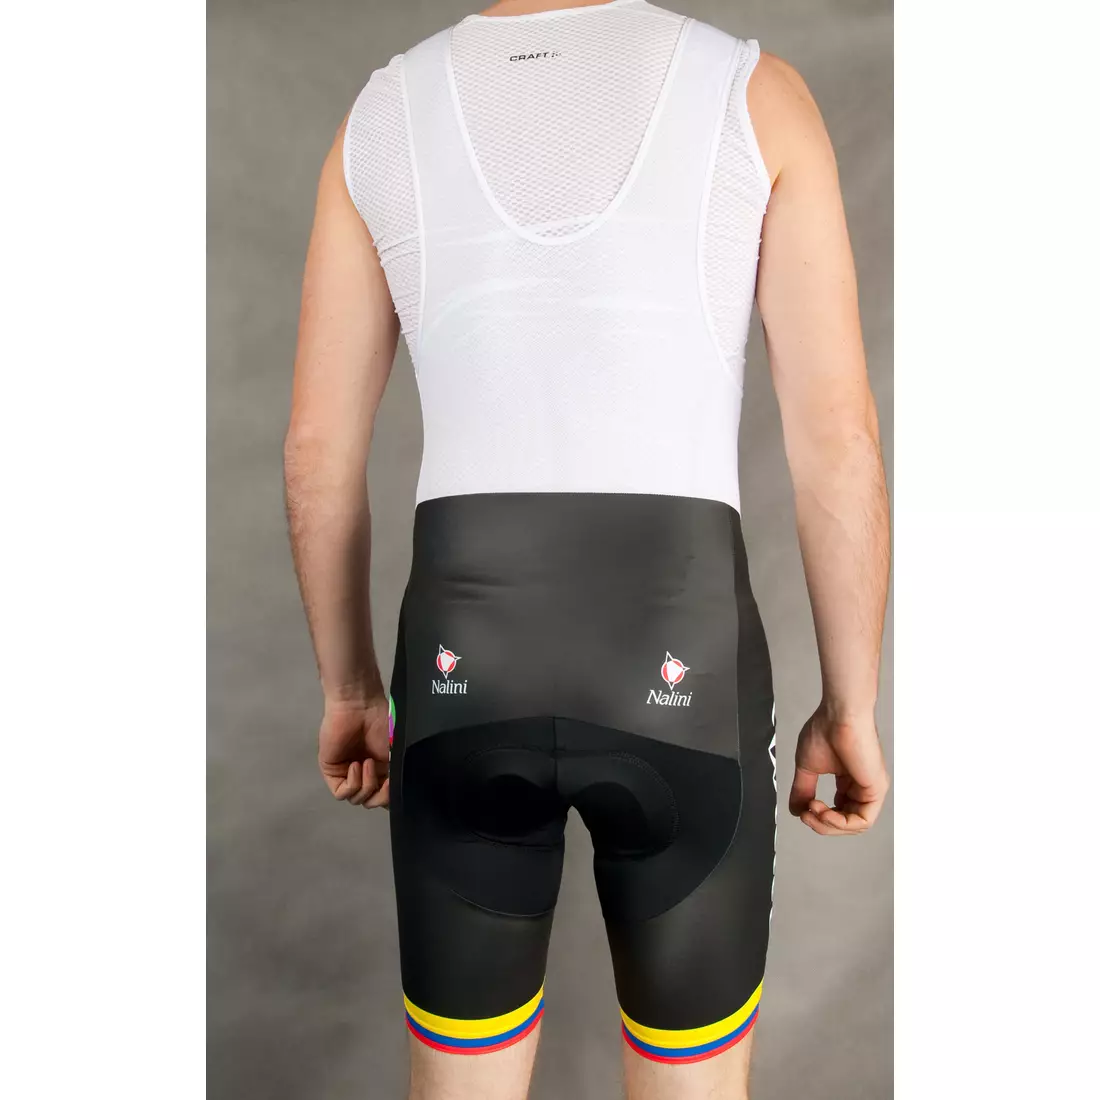 COLOMBIA 2015 cycling shorts